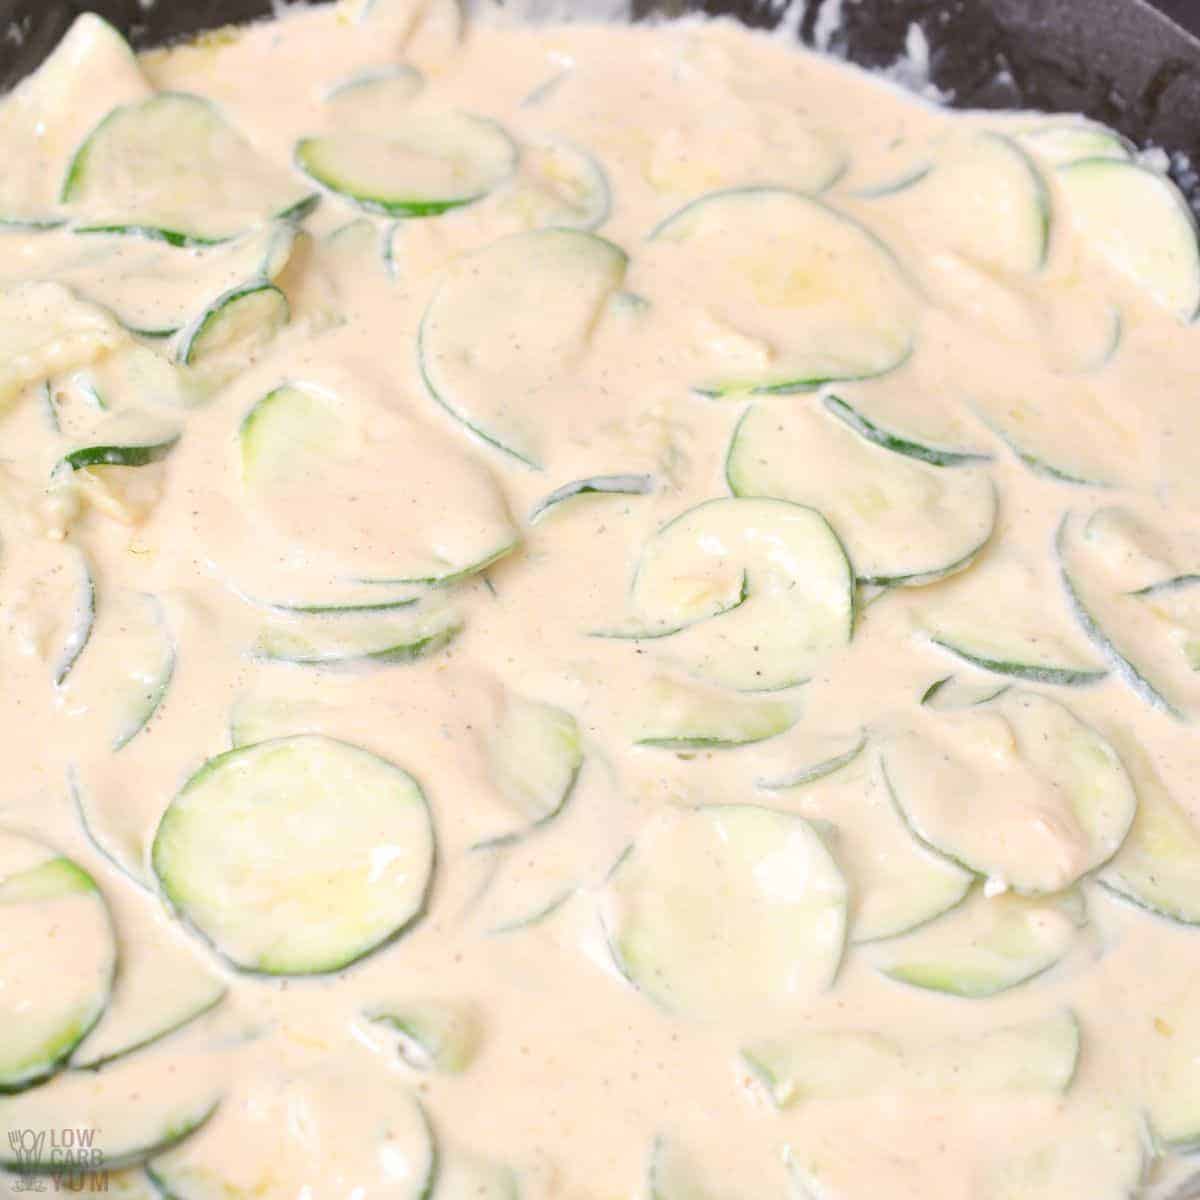 cream sauce poured over cooked zucchini slices.